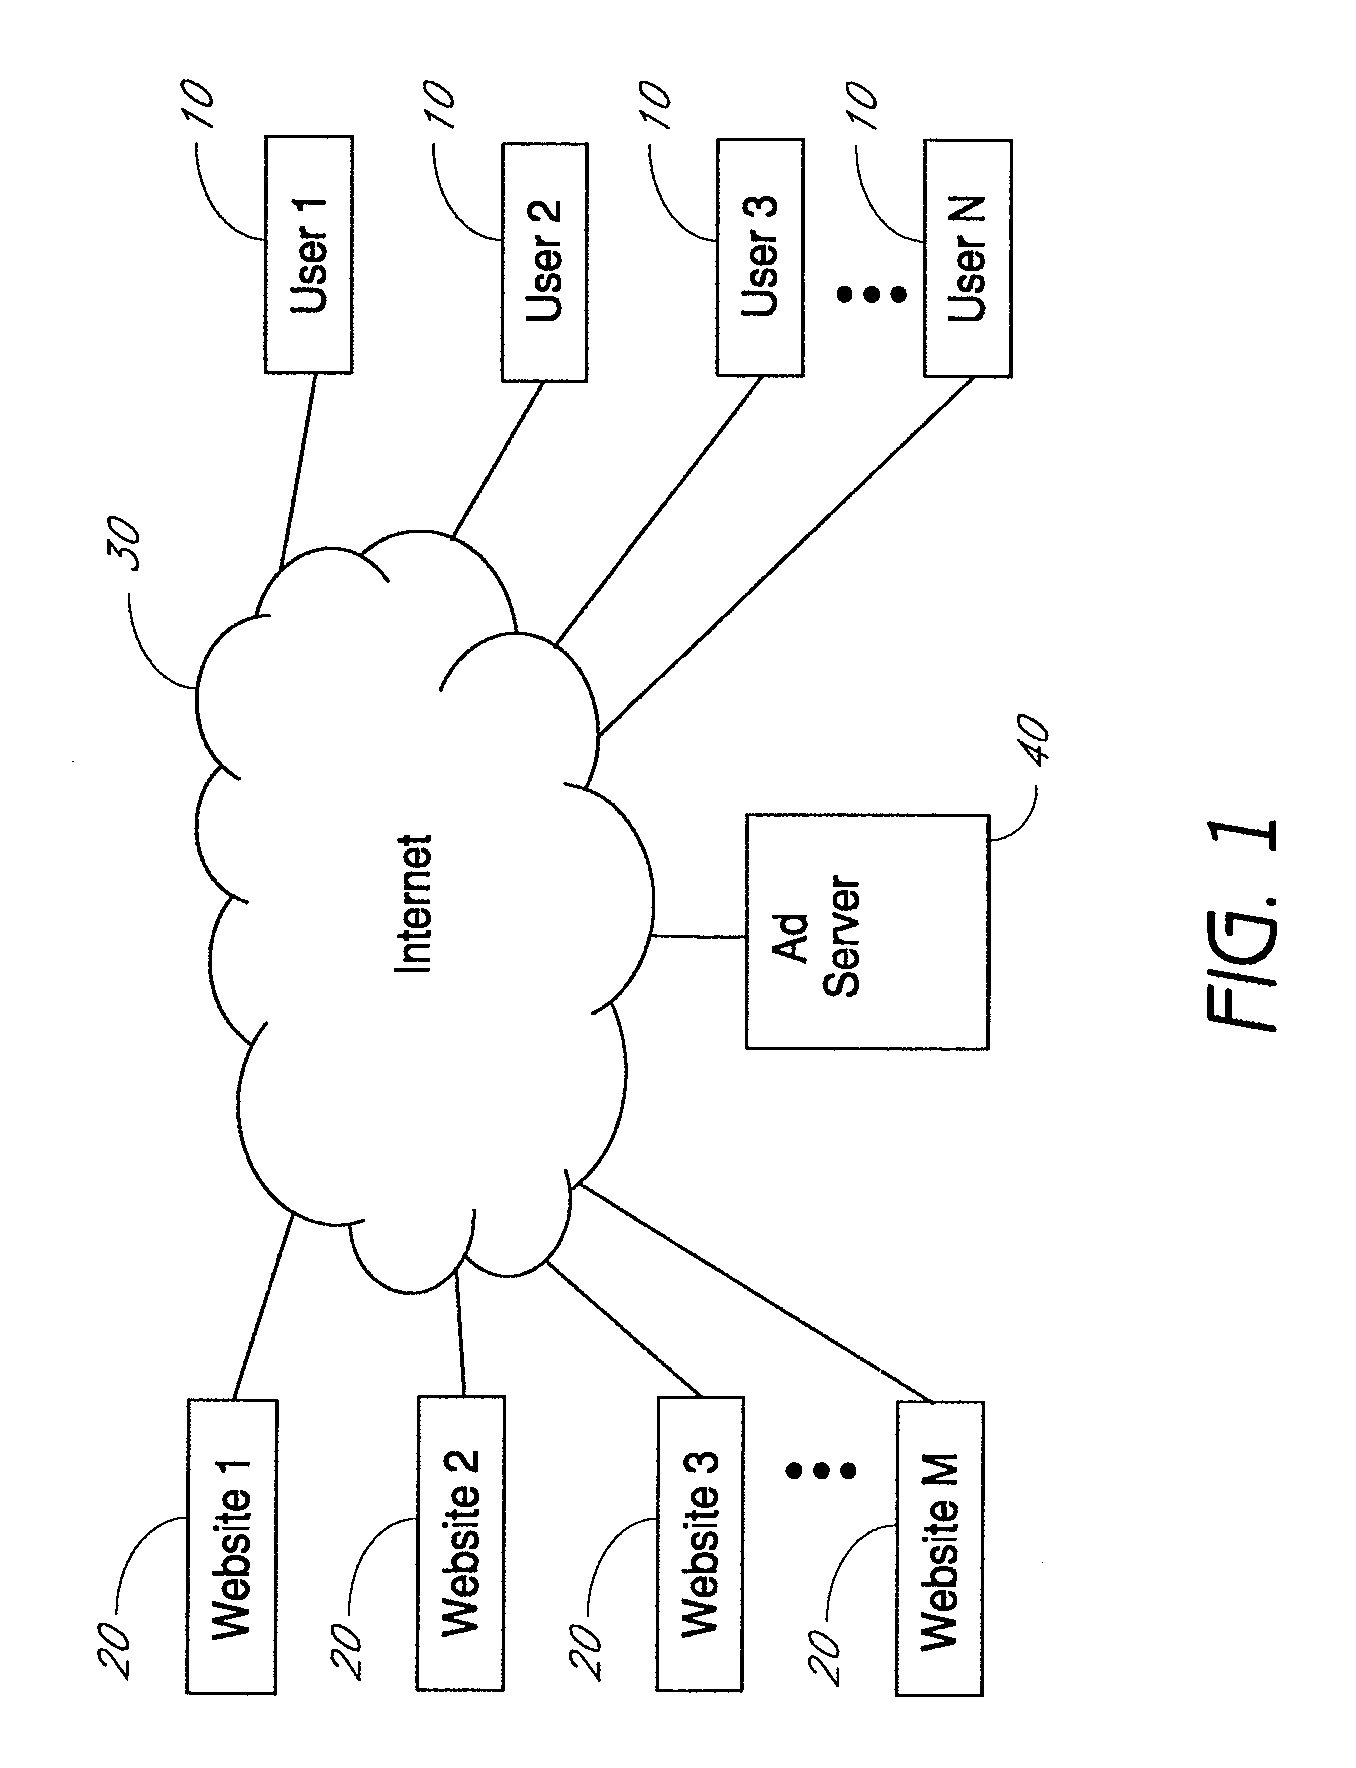 System and method of determining user demographic profiles of anonymous users